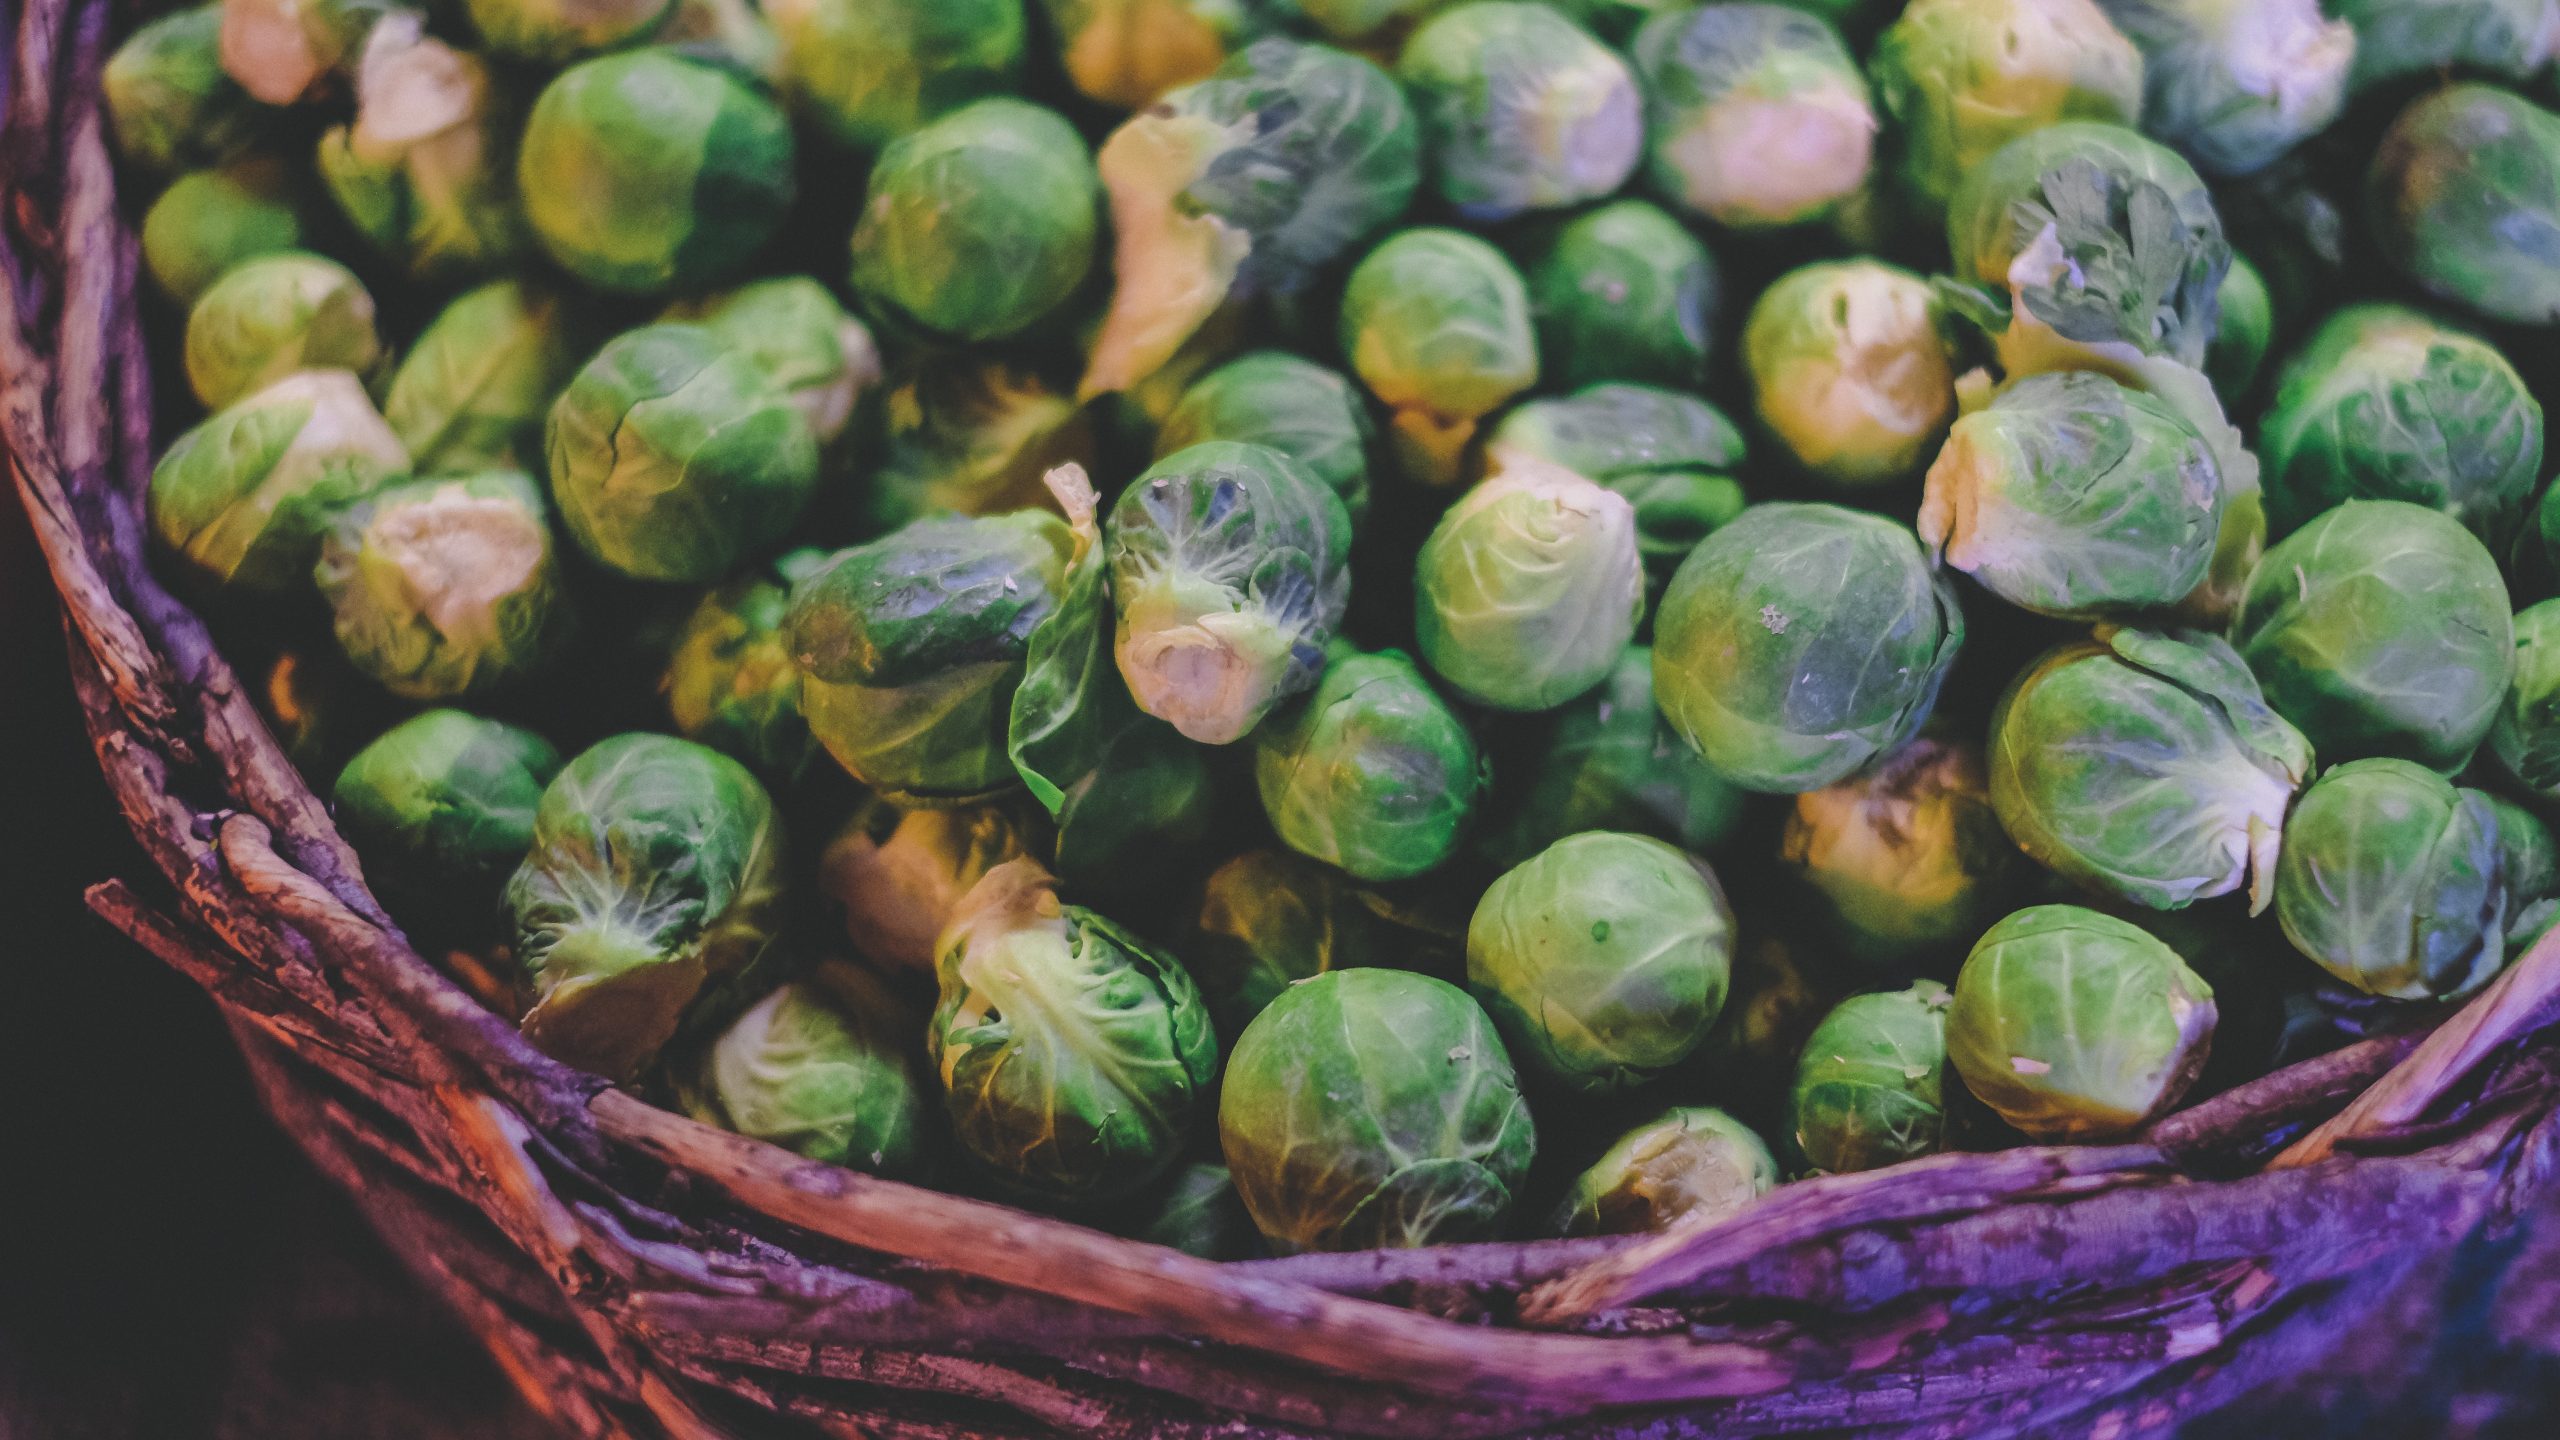 Can Chickens Eat Brussel Sprouts? Is It Safe?